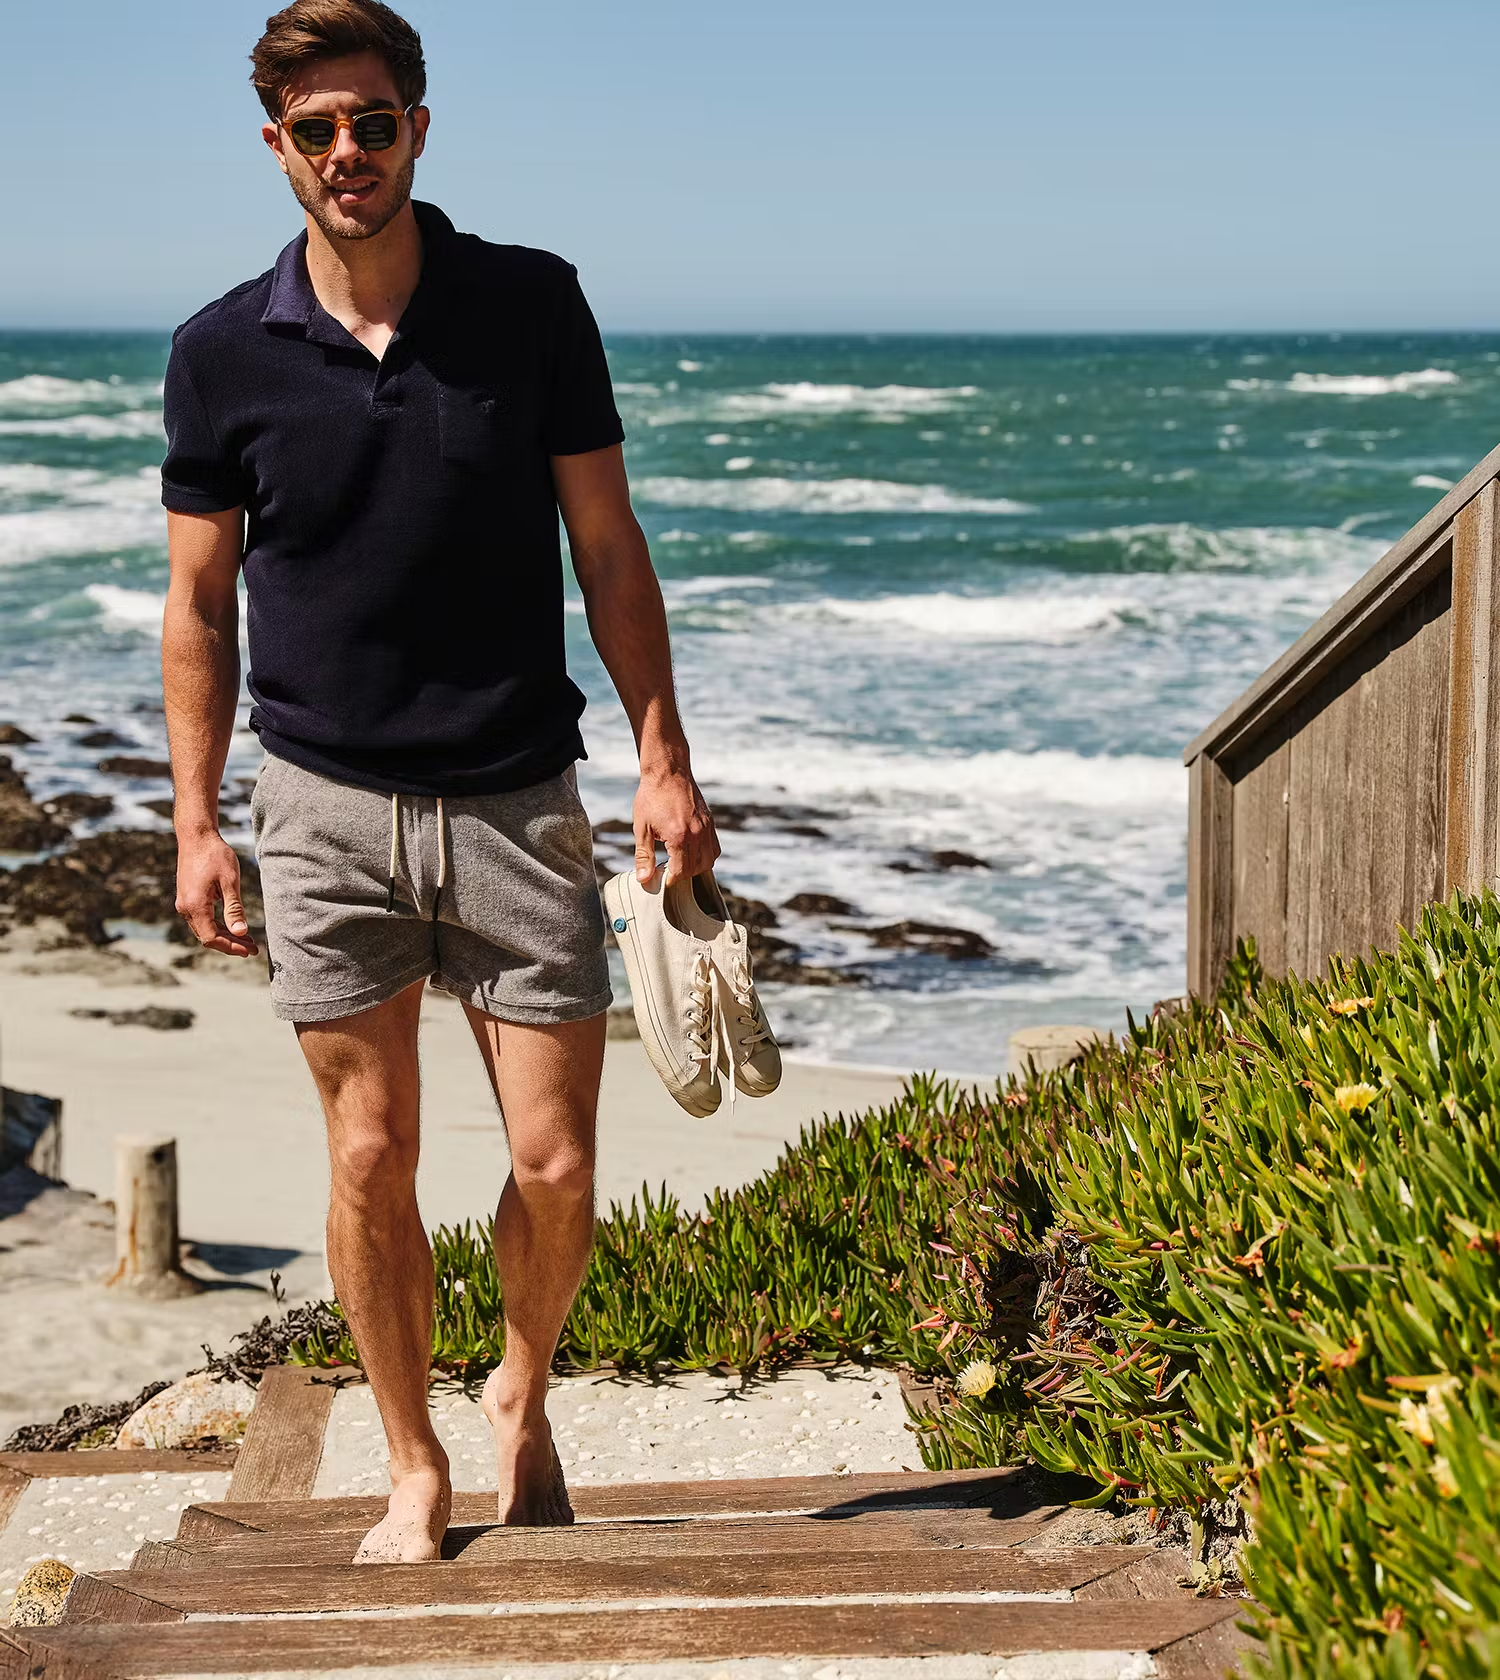 Men's shorts 13 inch inseam, there are several factors to consider to ensure you find the perfect pair that fits well and suits your style preferences.